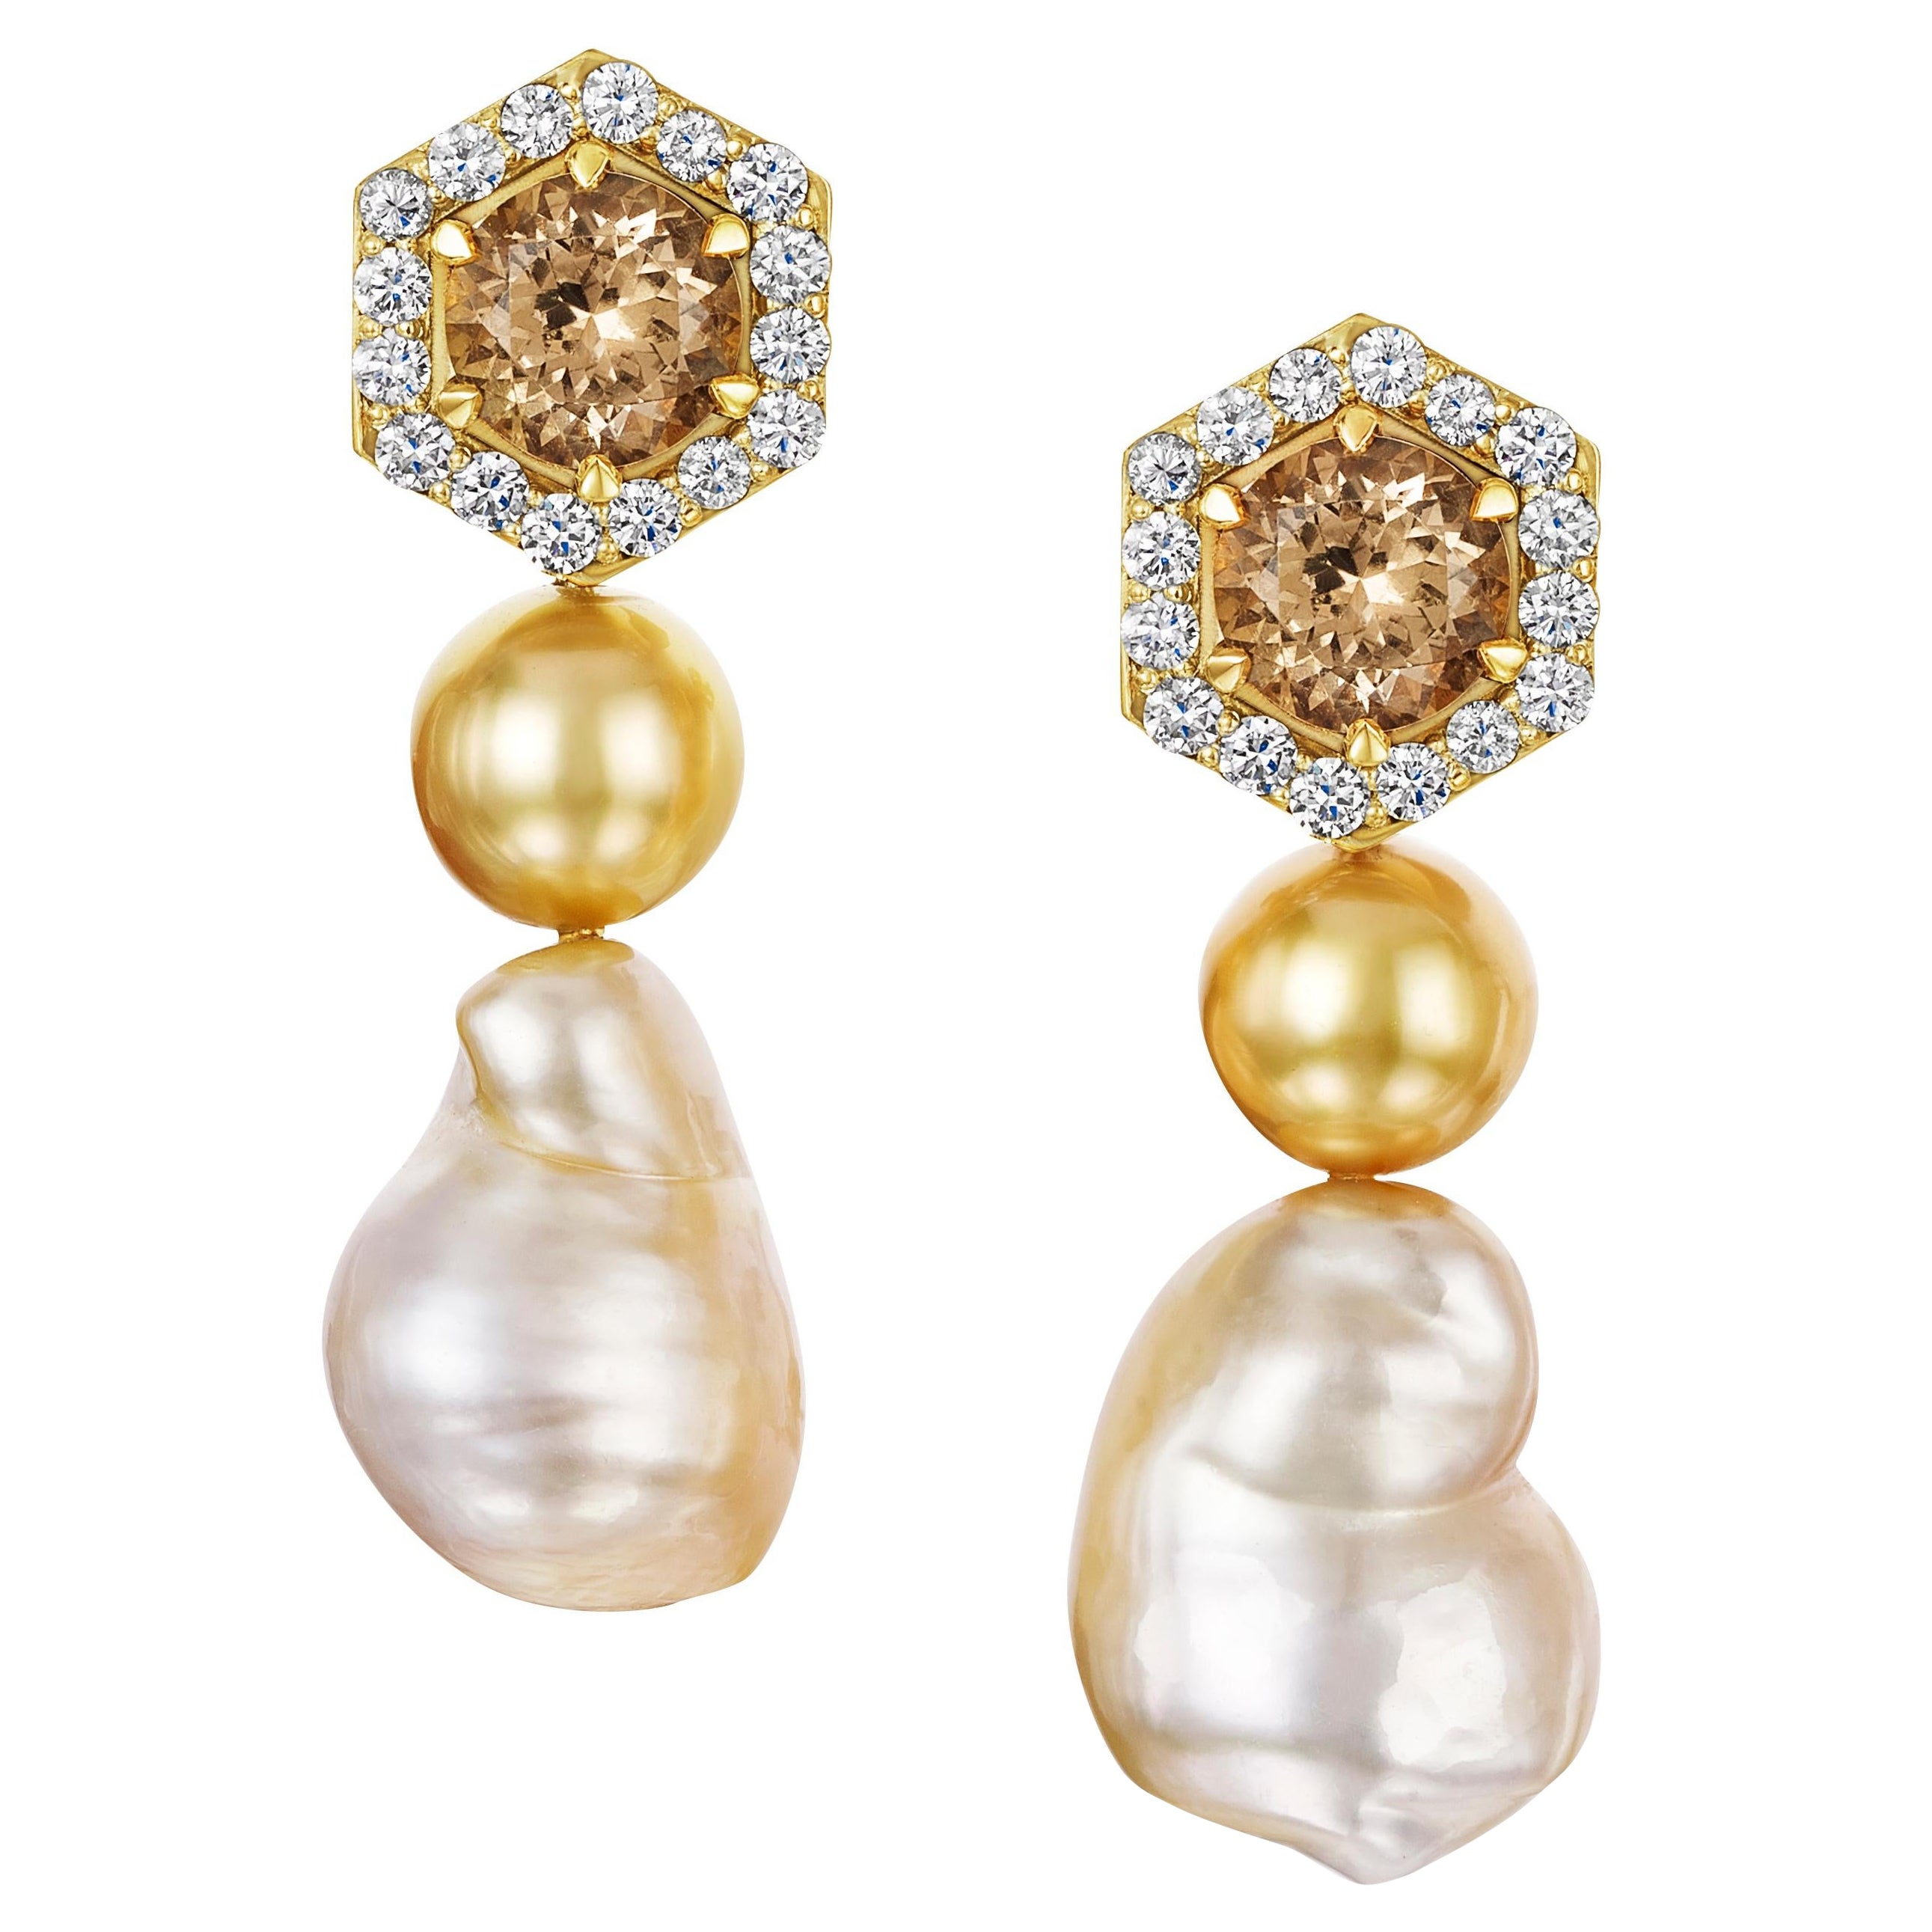 Aventina-Spencer, Imperial Topaz, Diamond, Golden South Sea Pearl Earrings For Sale